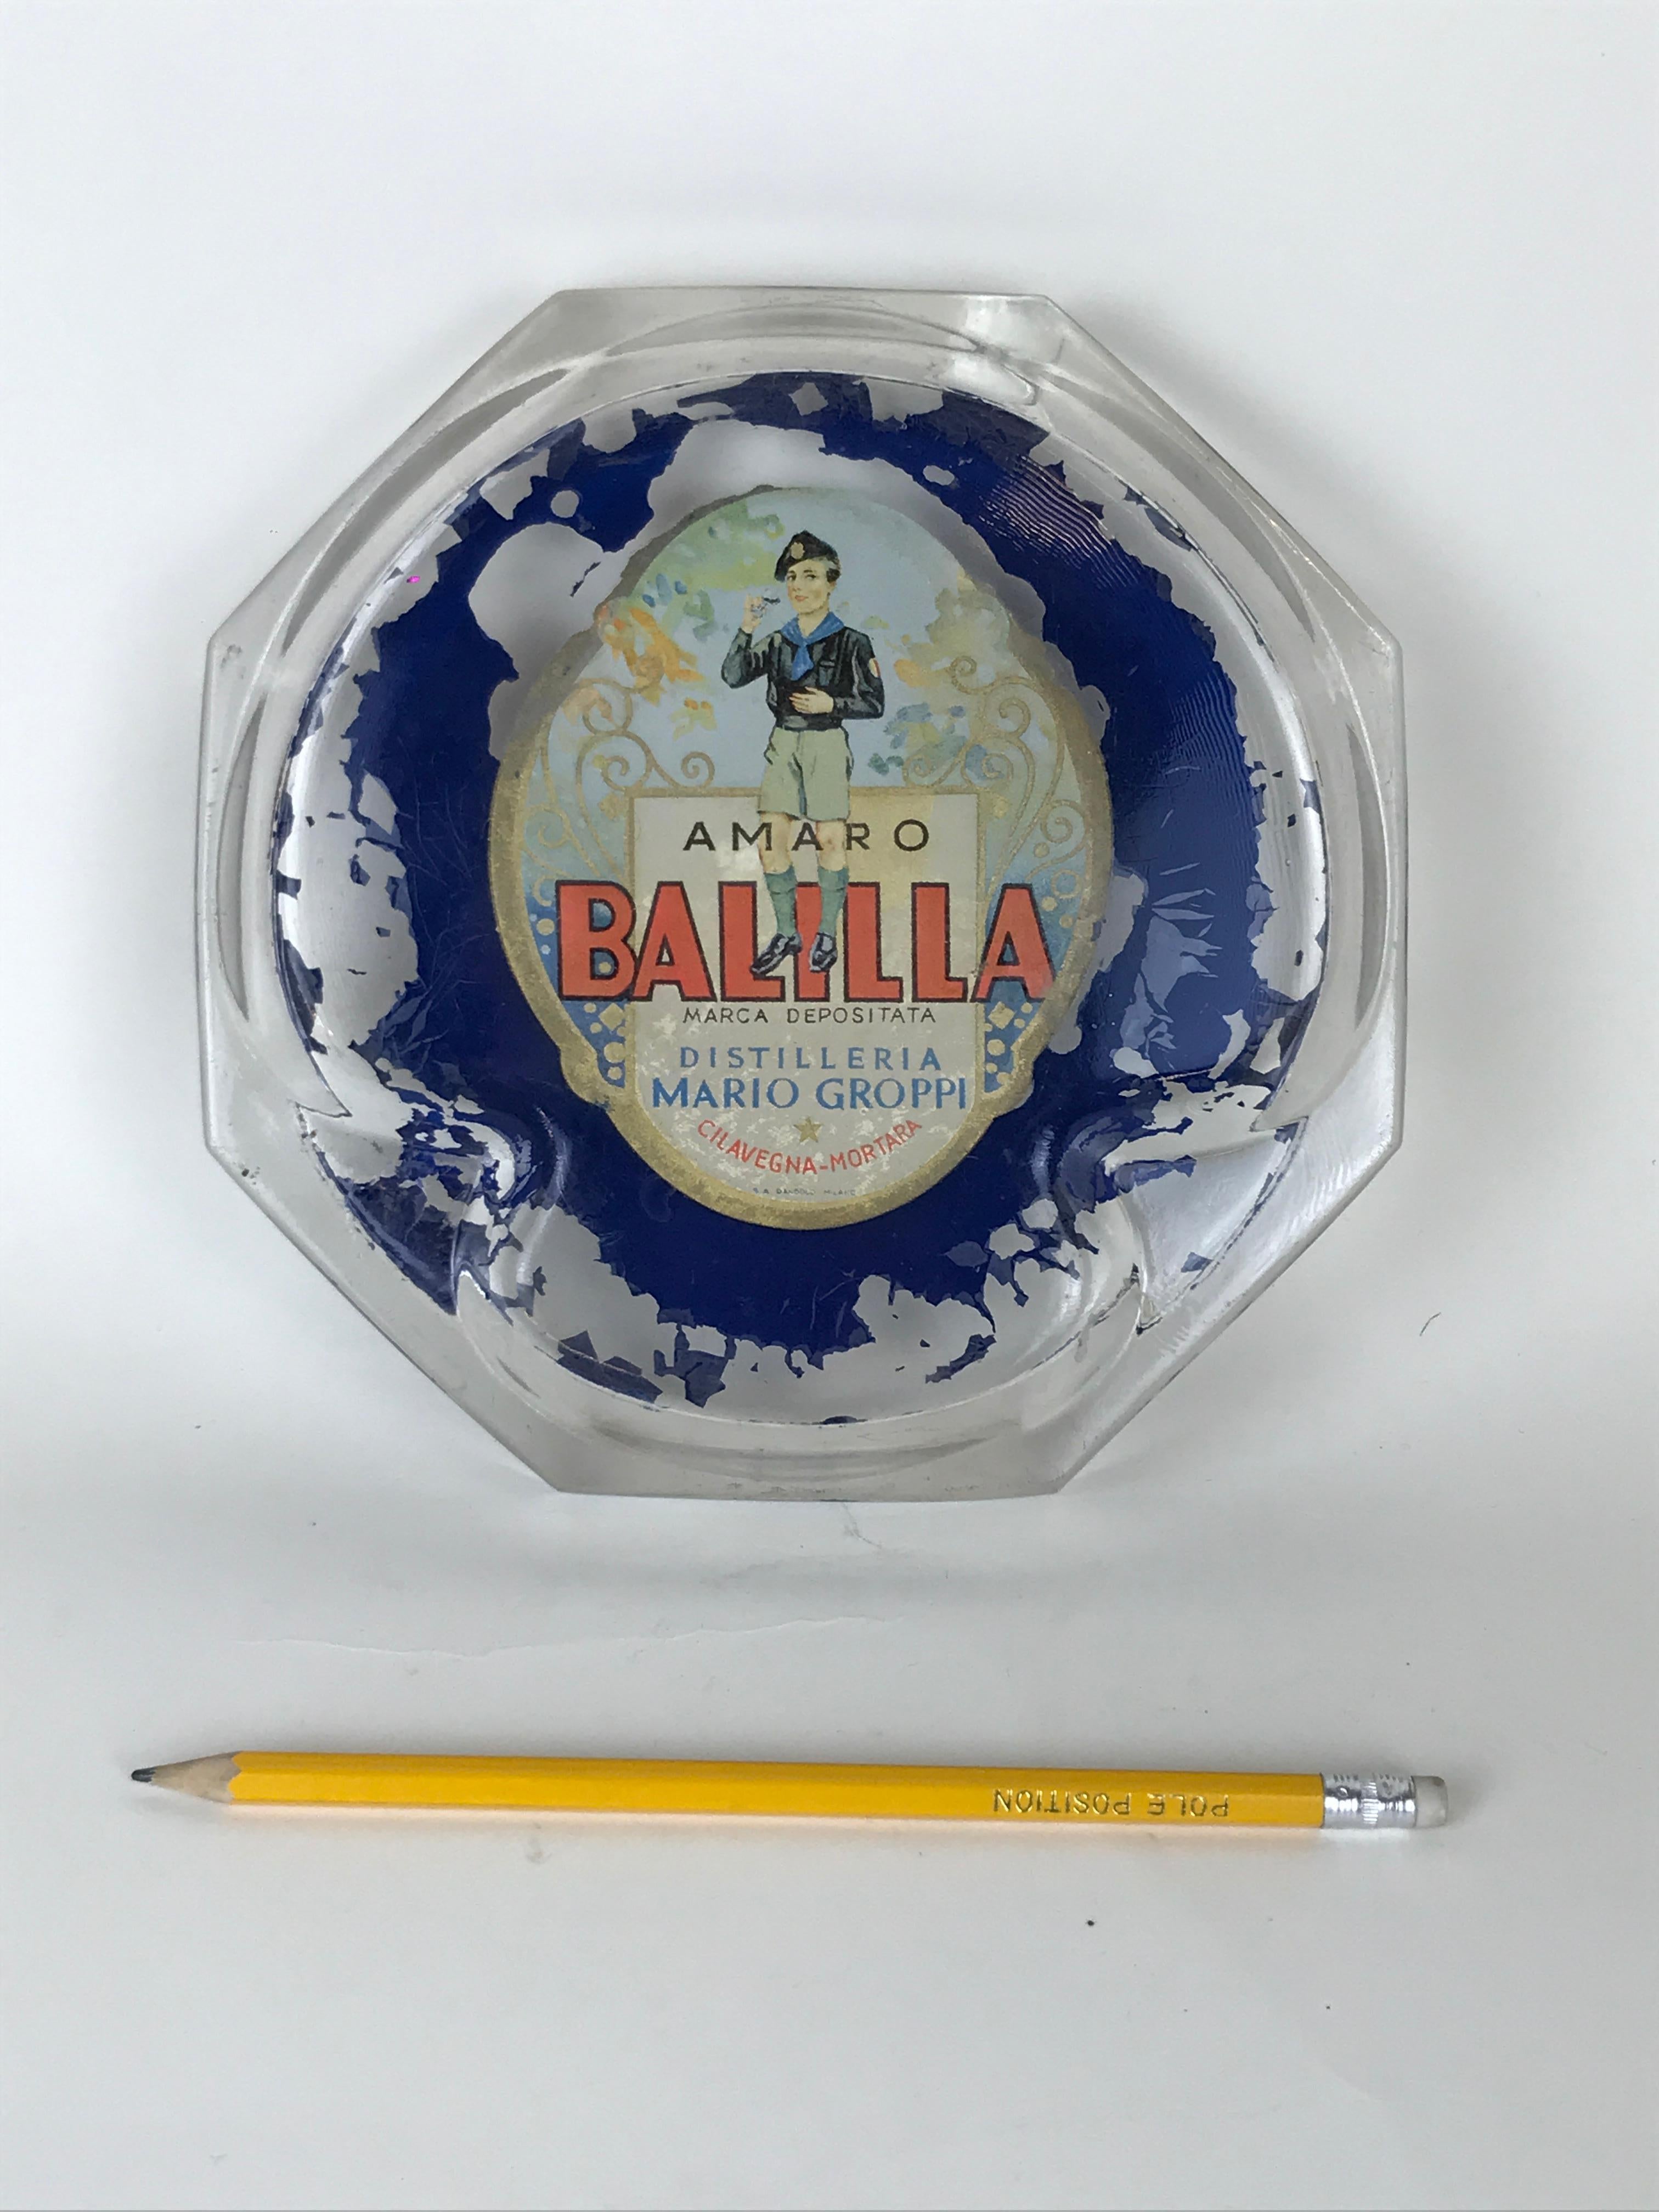 Vintage rare Amaro Balilla advertising ashtray in glass made in the 1930s in Italy.

Printed on back 